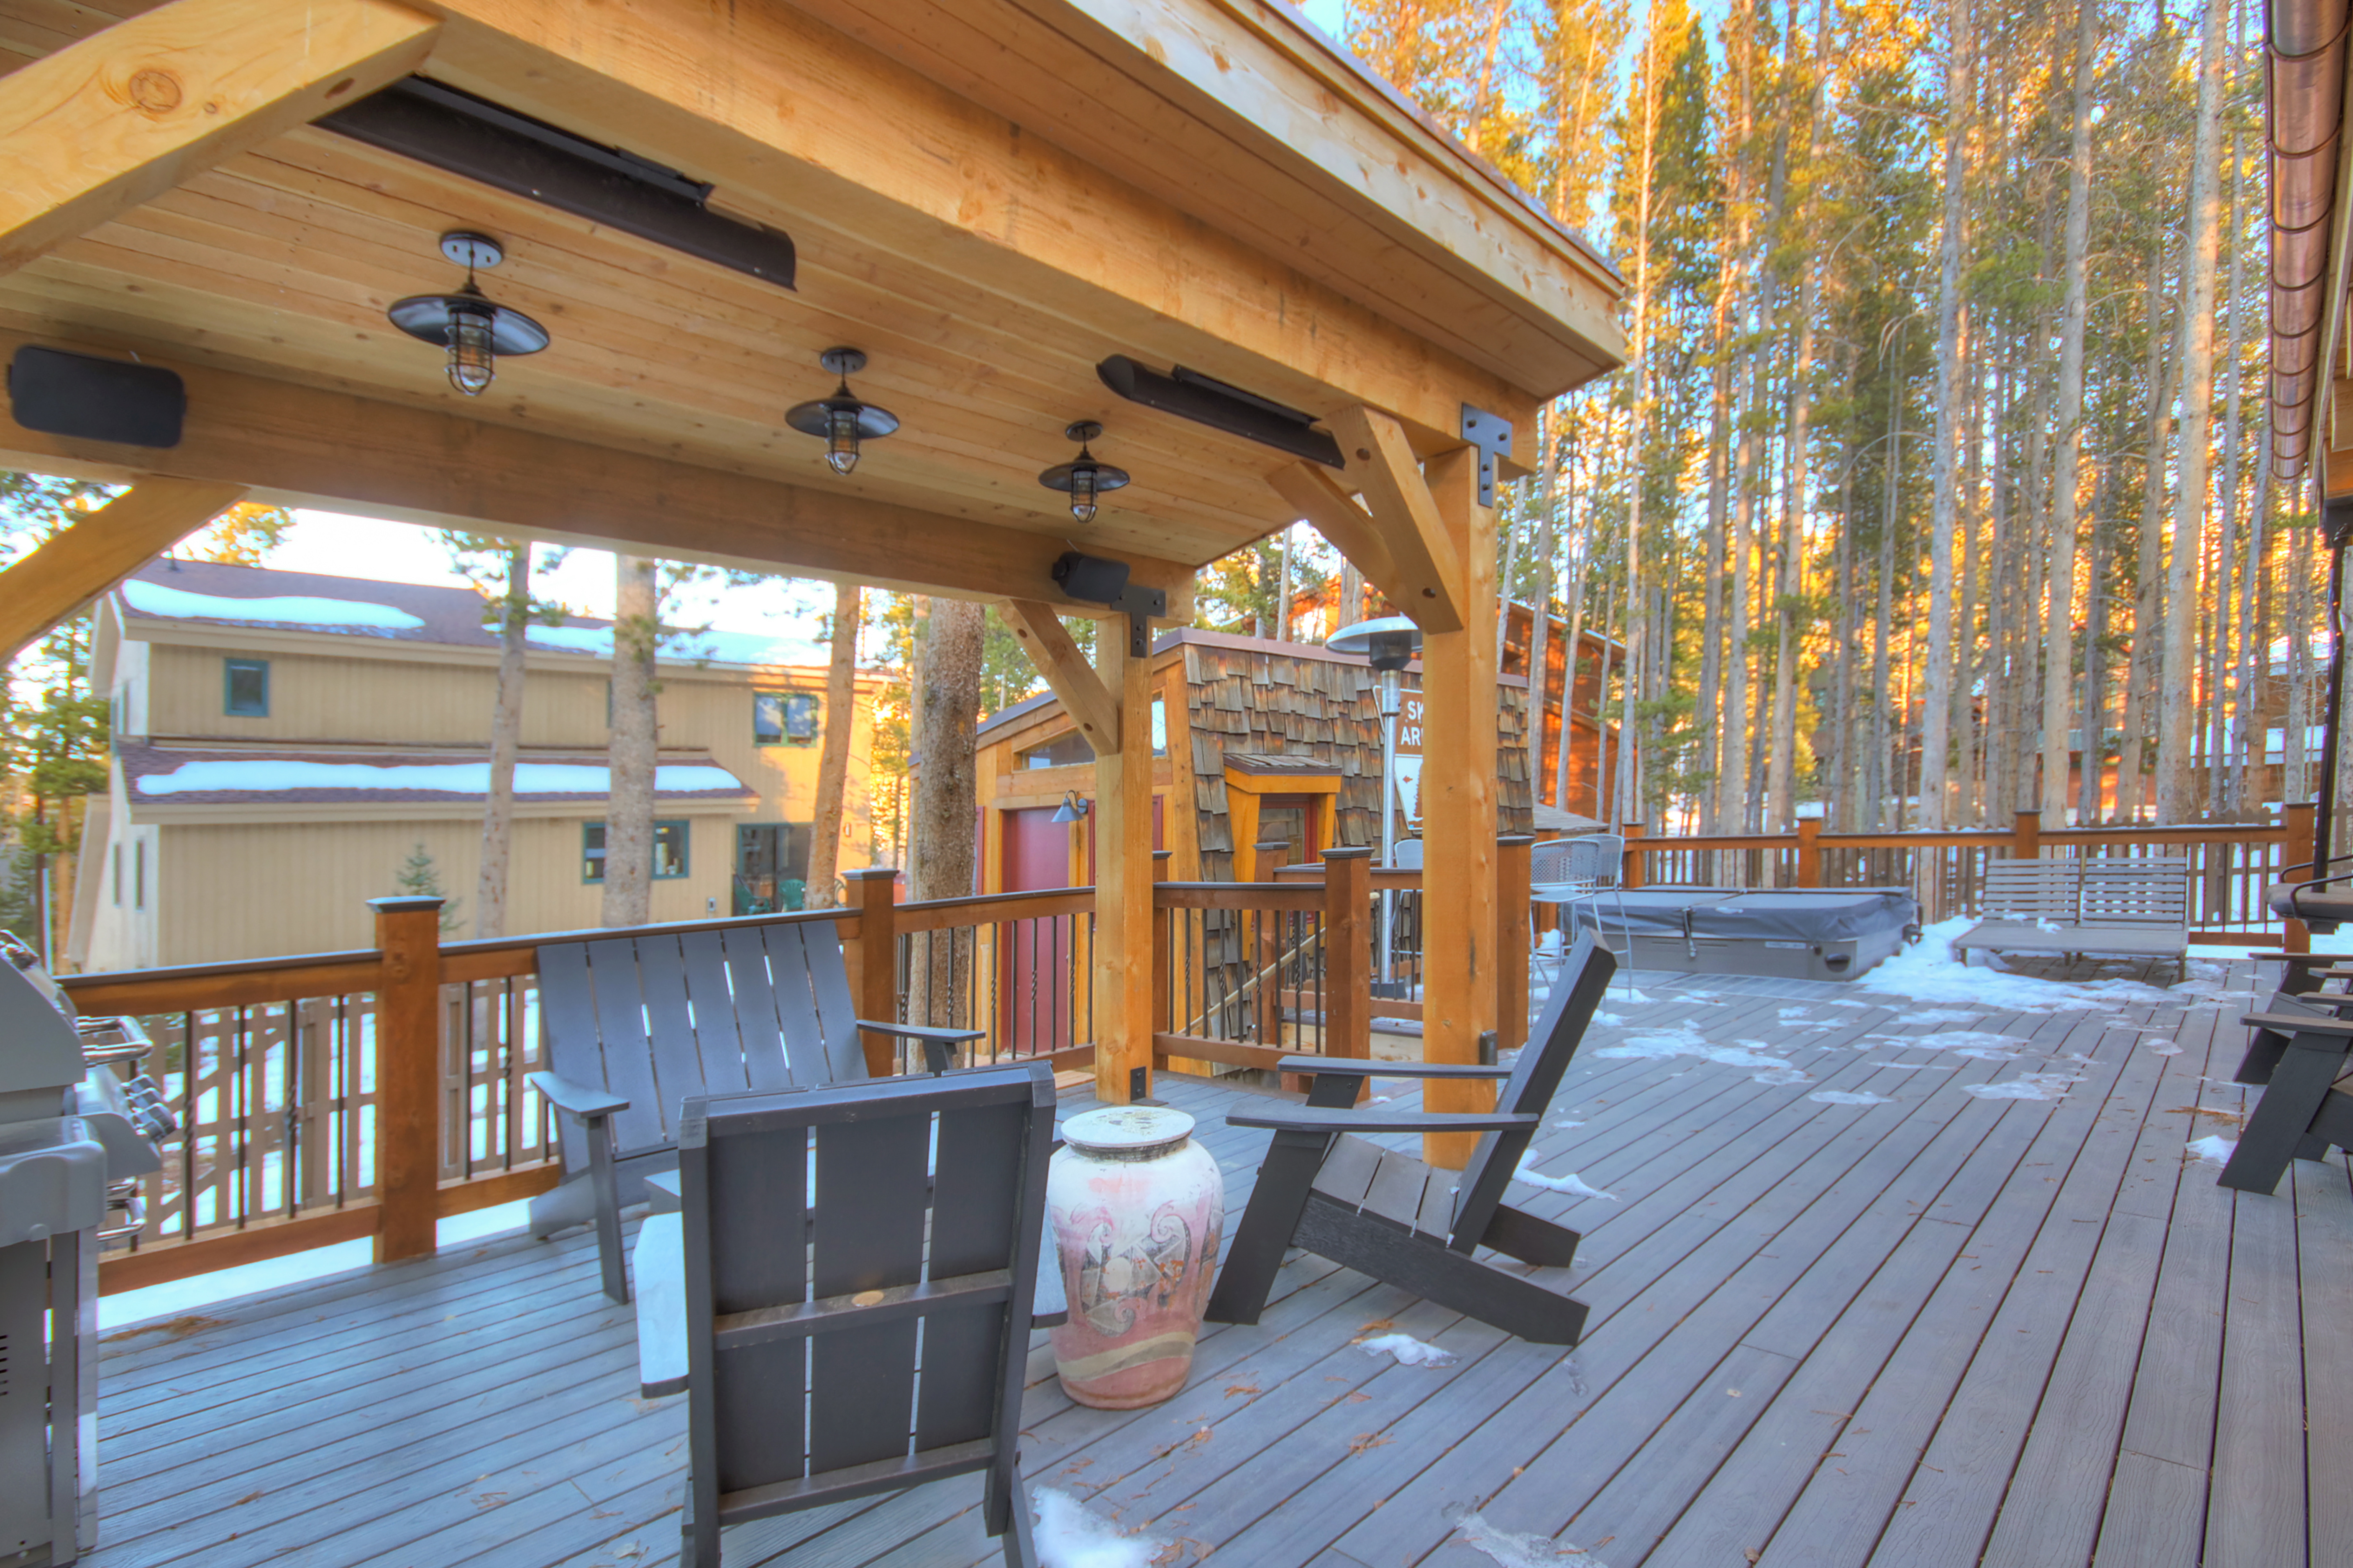 Additional view of deck with seating and hot tub